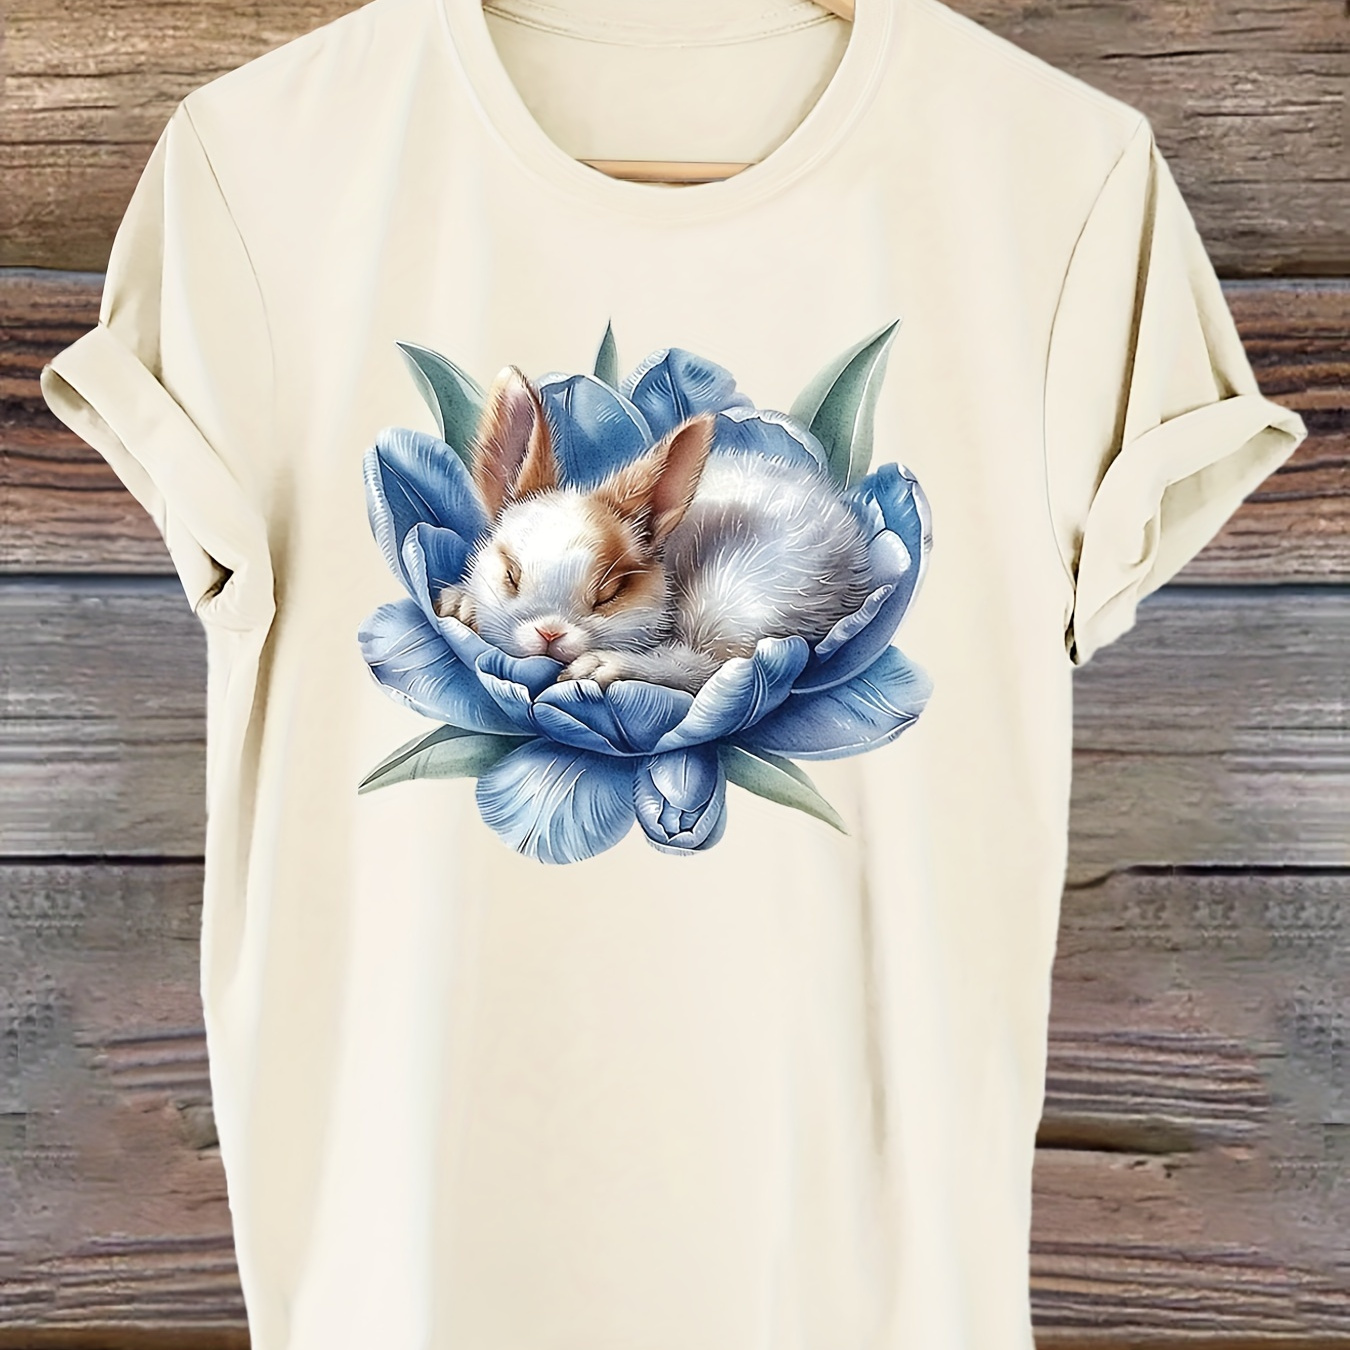 

Rabbit Print T-shirt, Short Sleeve Crew Neck Casual Top For Summer & Spring, Women's Clothing